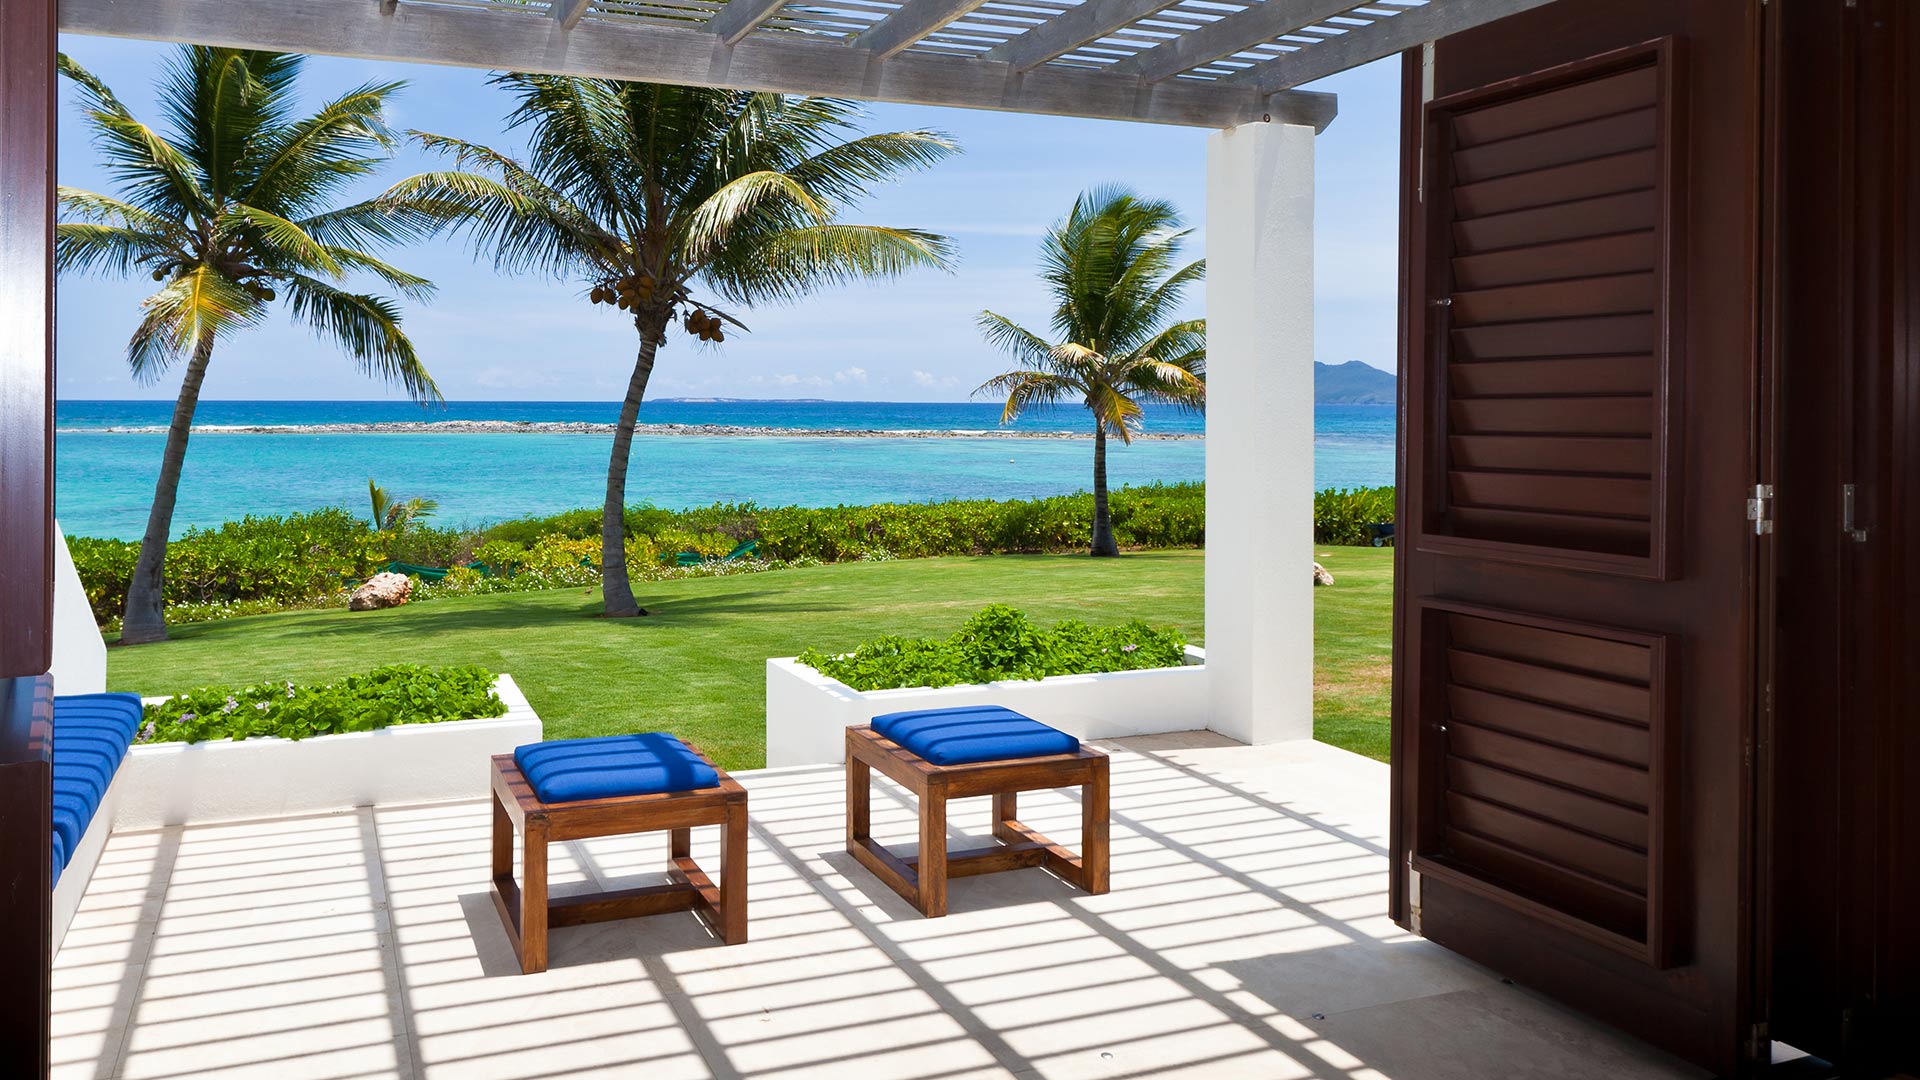 Master suites feature indoor/outdoor island living for ultimate relaxation during an Anguilla villa vacation at Le Bleu Villa.
